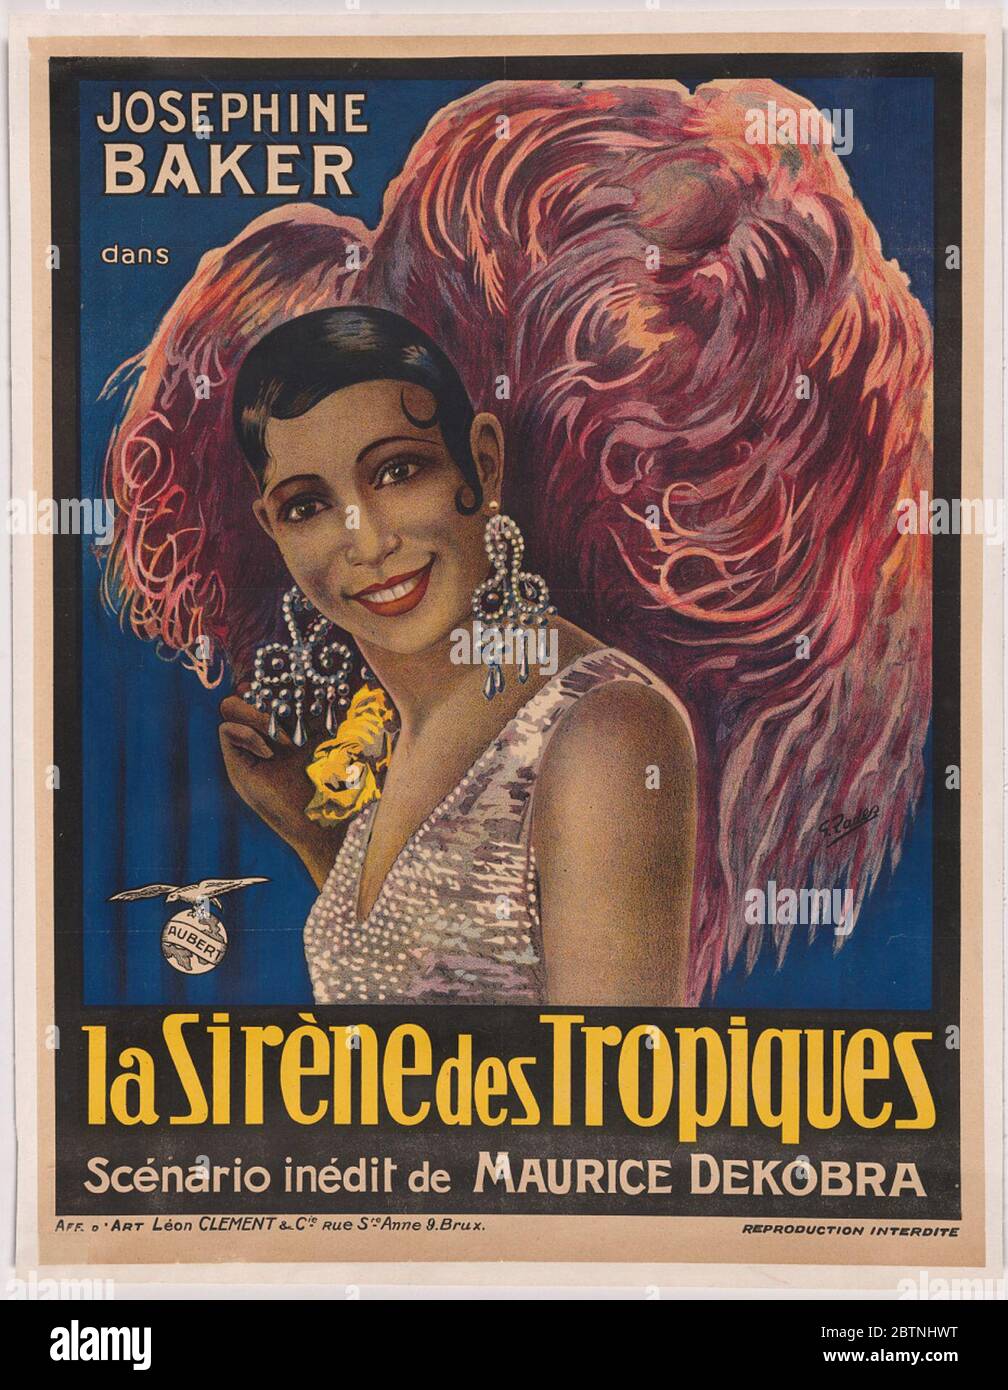 Josephine Baker. In 1927, a well-known novelist, Maurice Dekobra, together with Baker's manager, Pepito Abatino, wrote a screenplay for Baker. Stock Photo